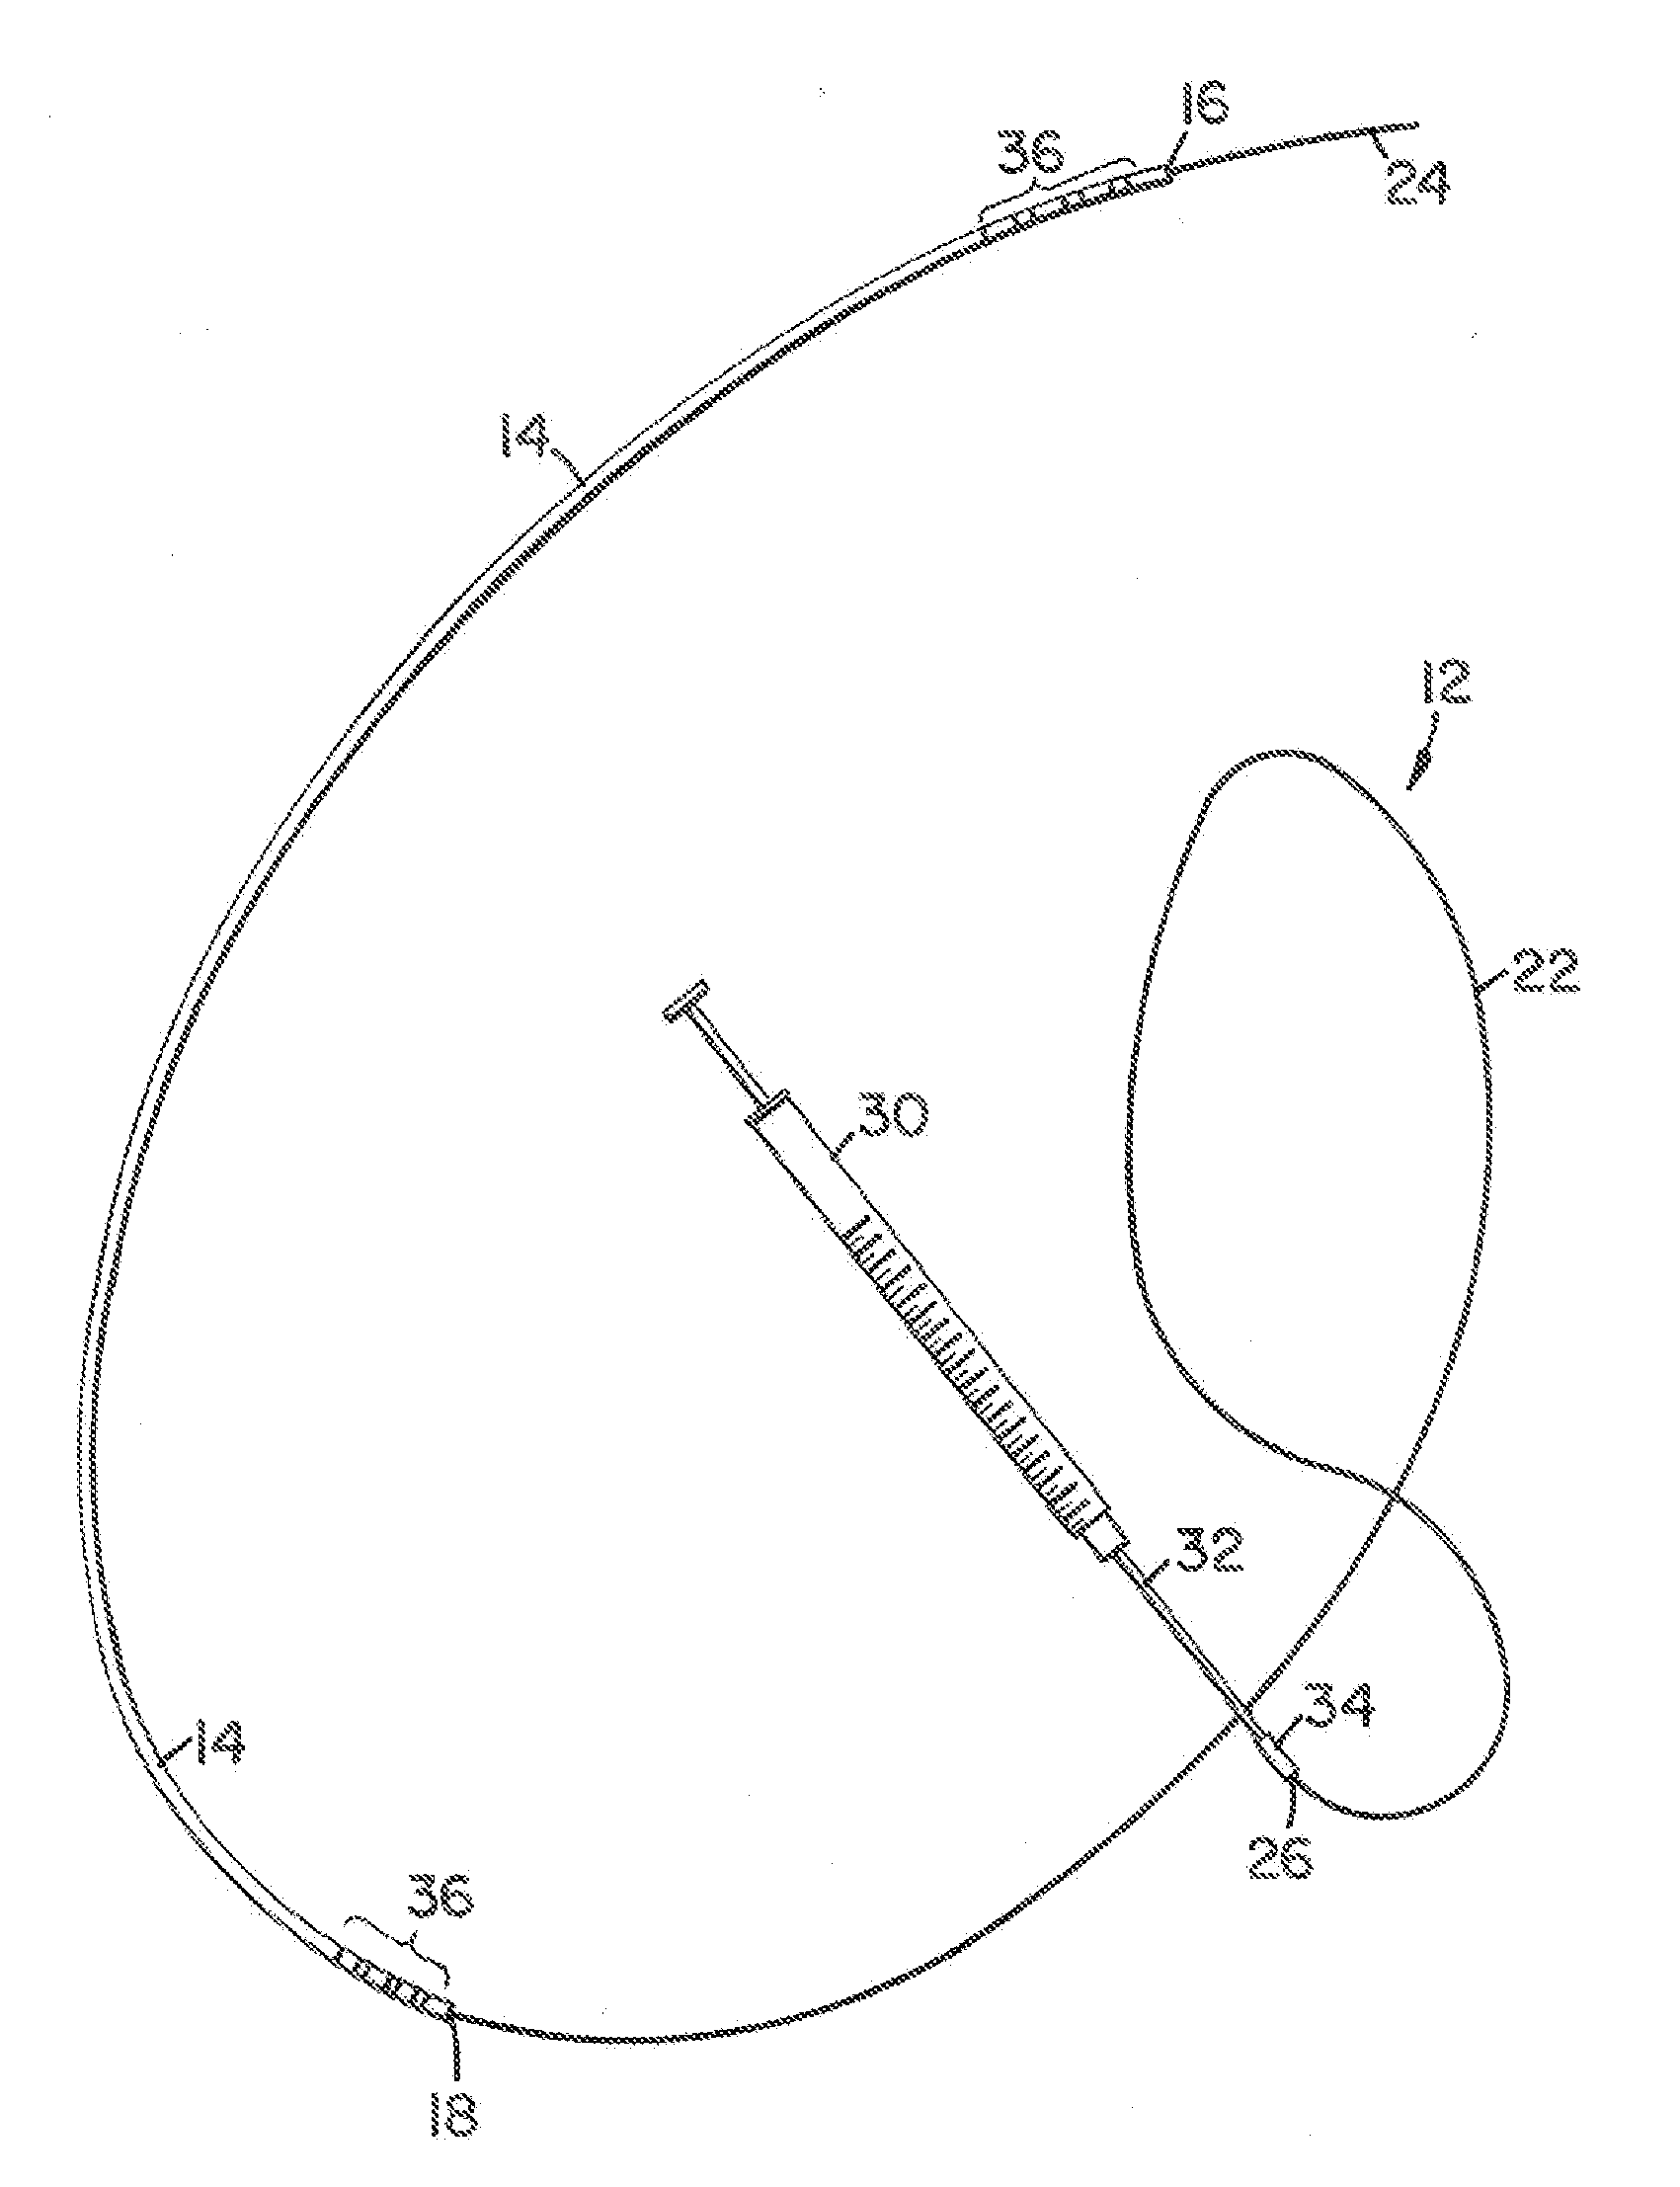 Infusion device and method for infusing material into the brain of a patient